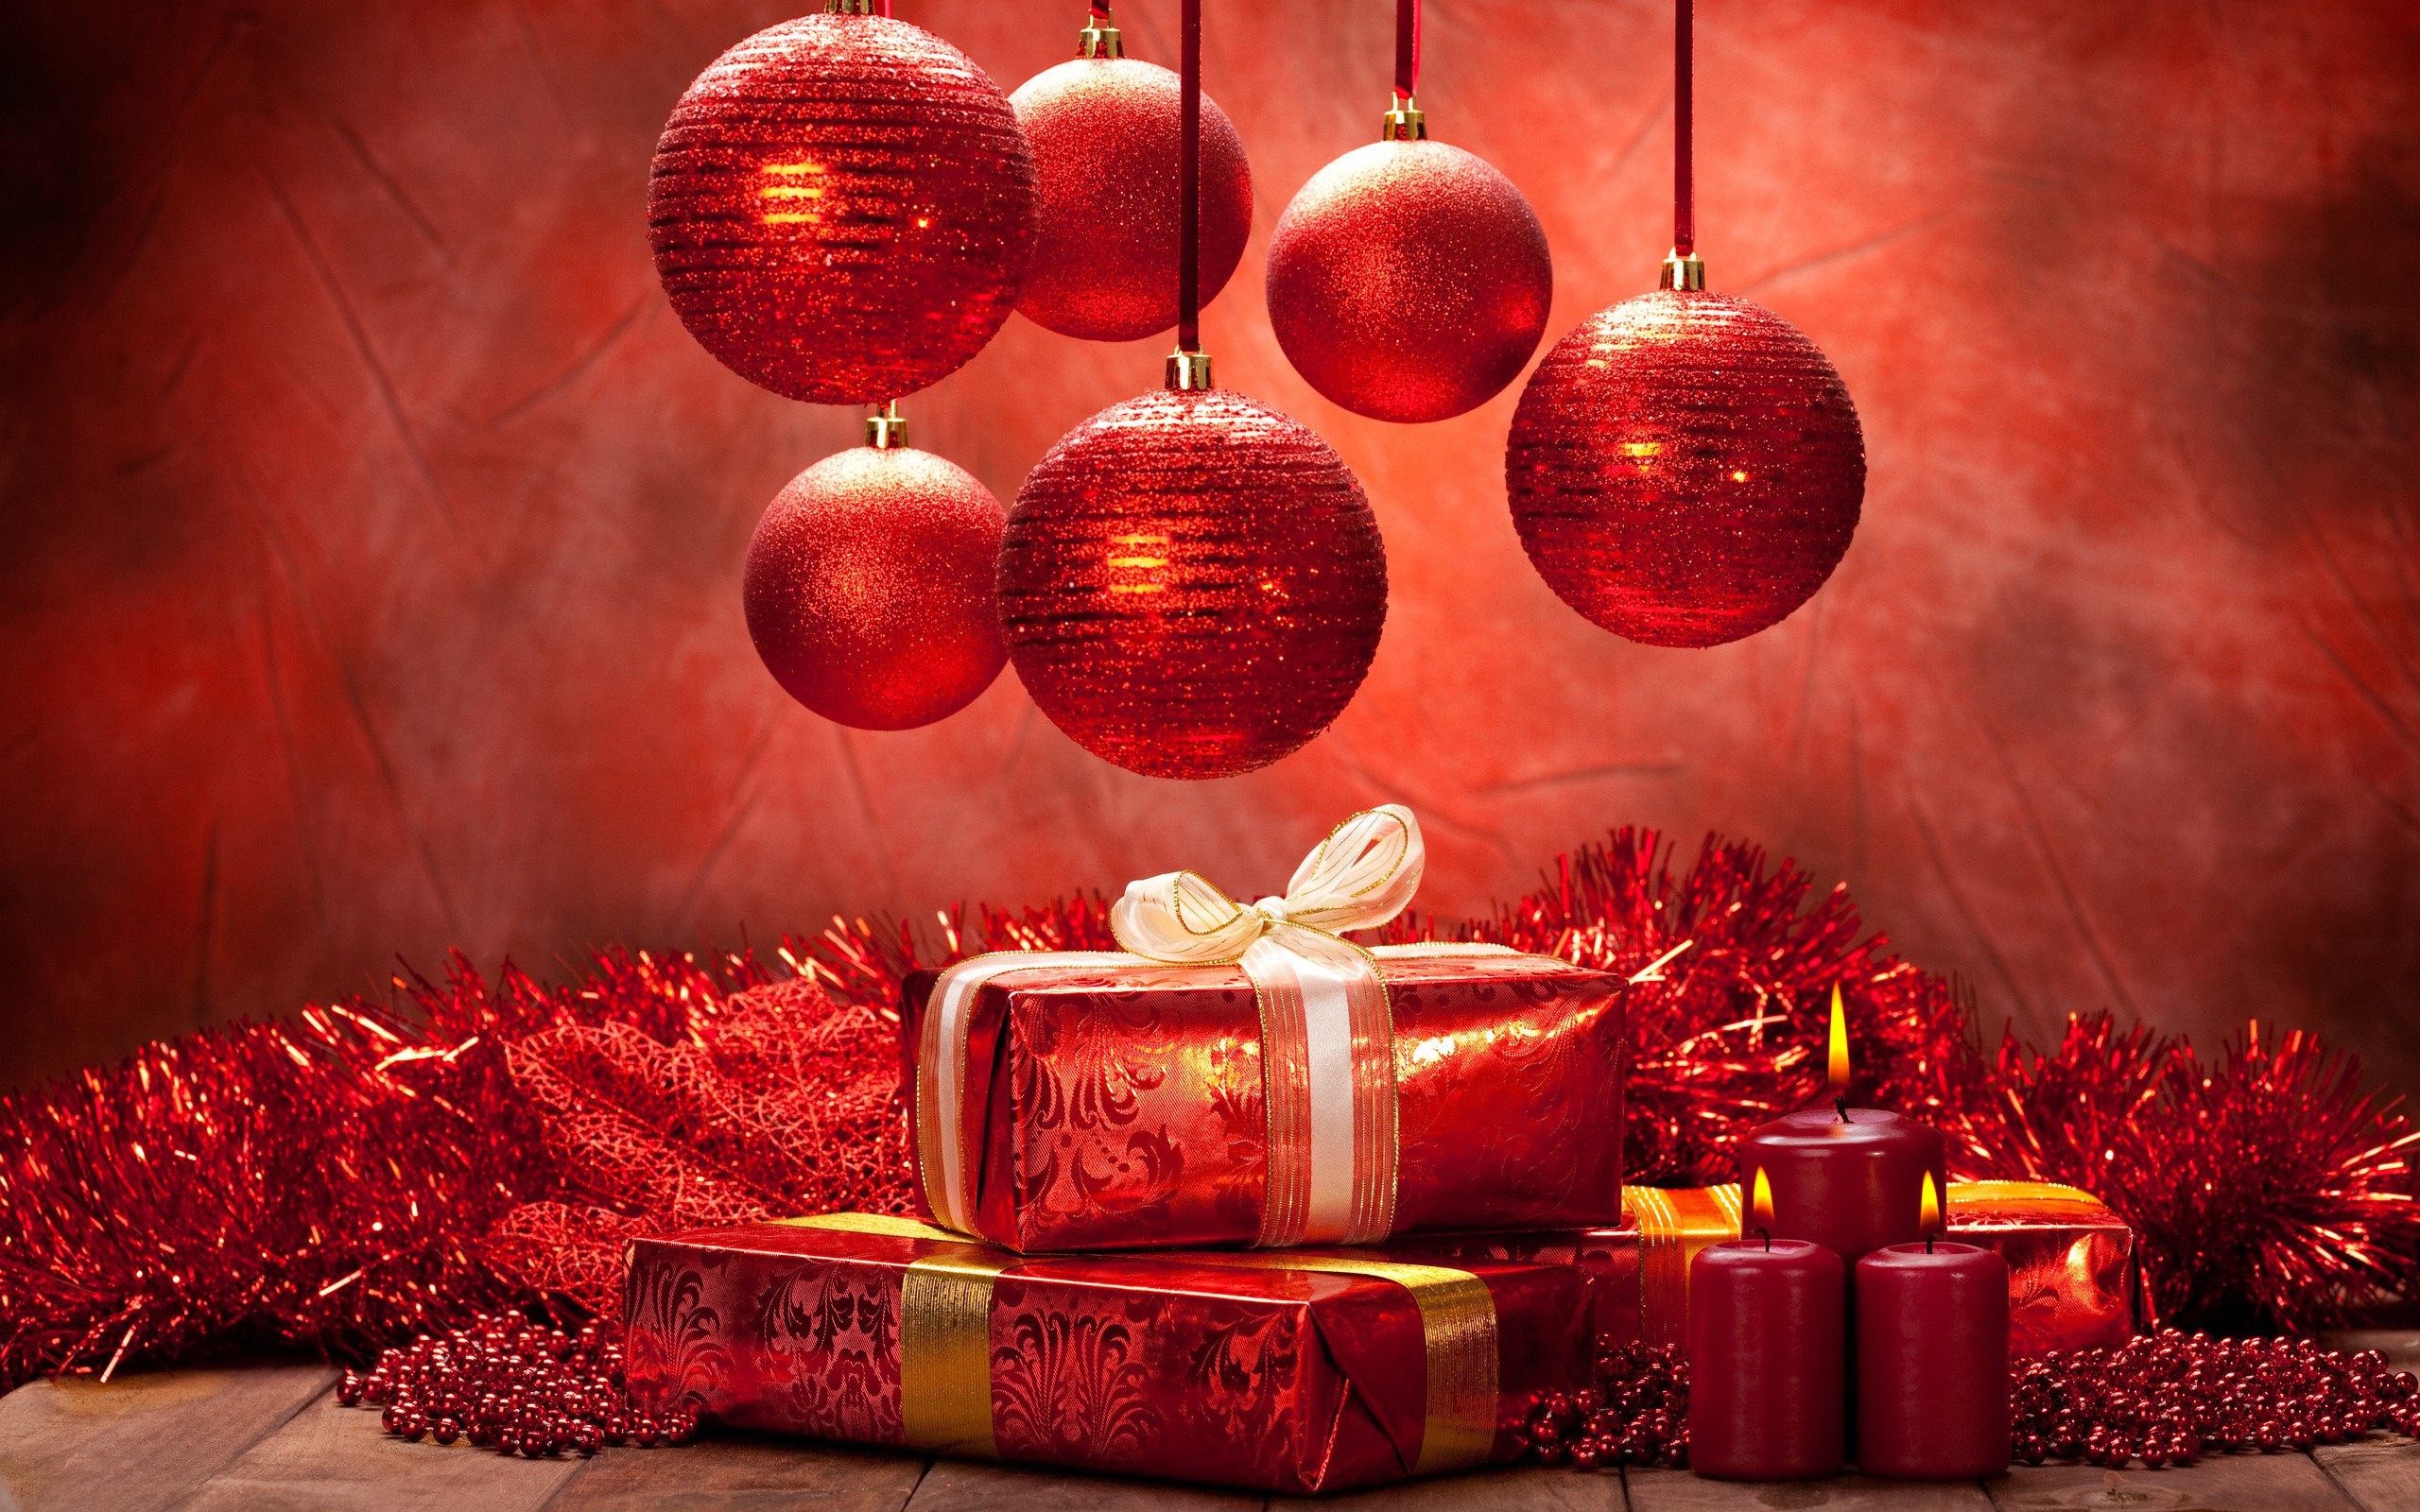 snow, Christmas Ornaments, Presents, Decorations, Red, Candles Wallpaper